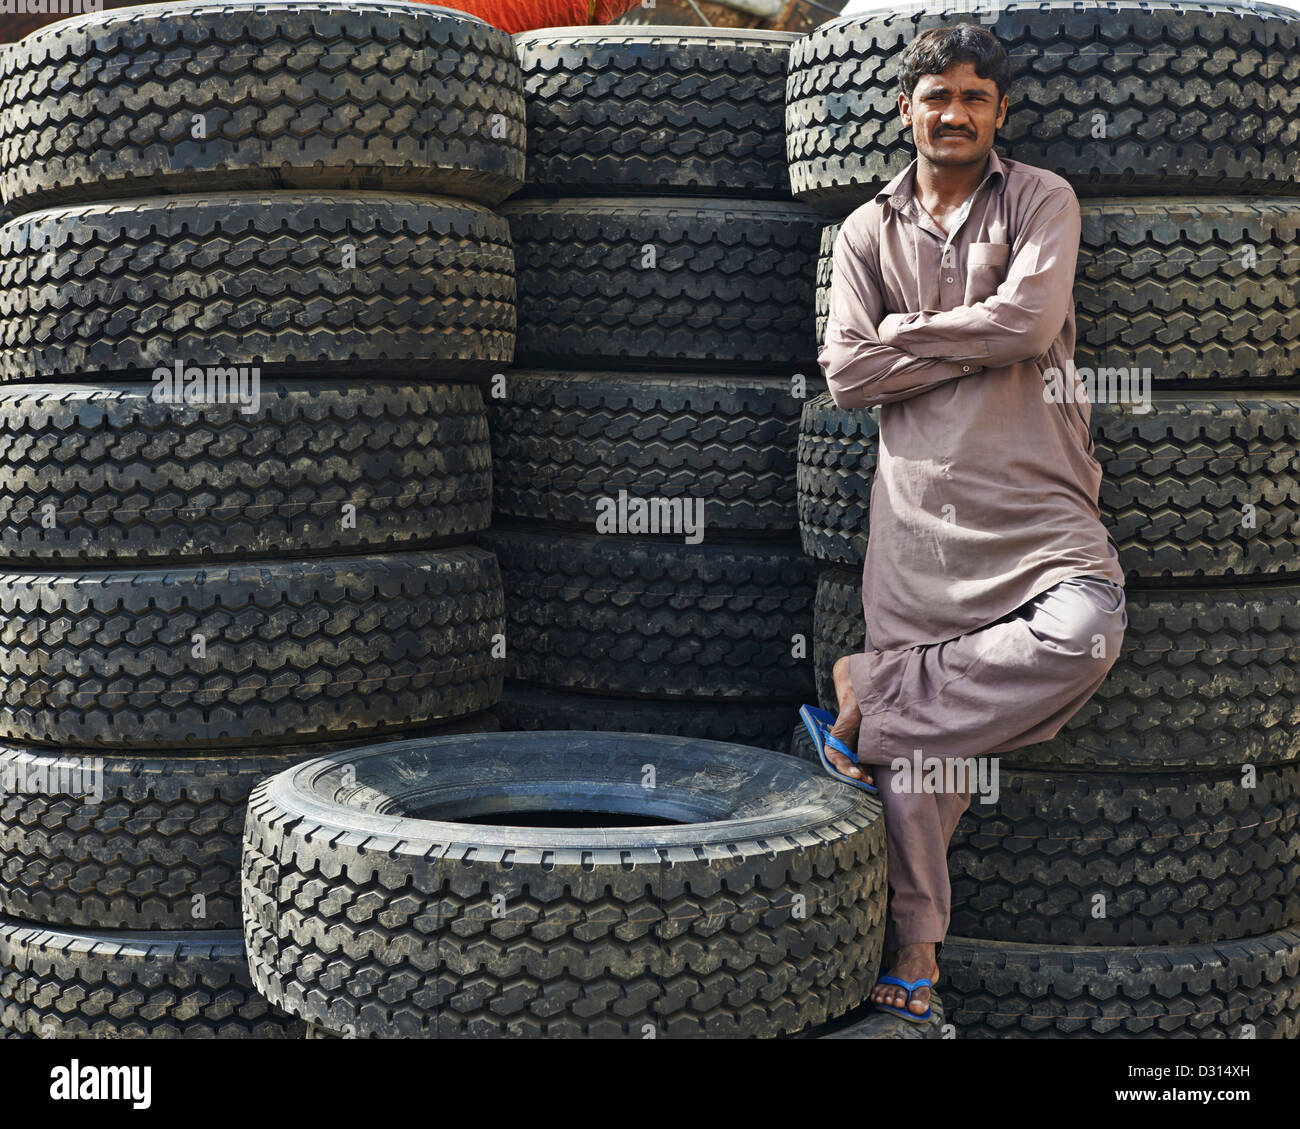 A man crosses his arm and raises his leg in front of a huge stack of tires Stock Photo